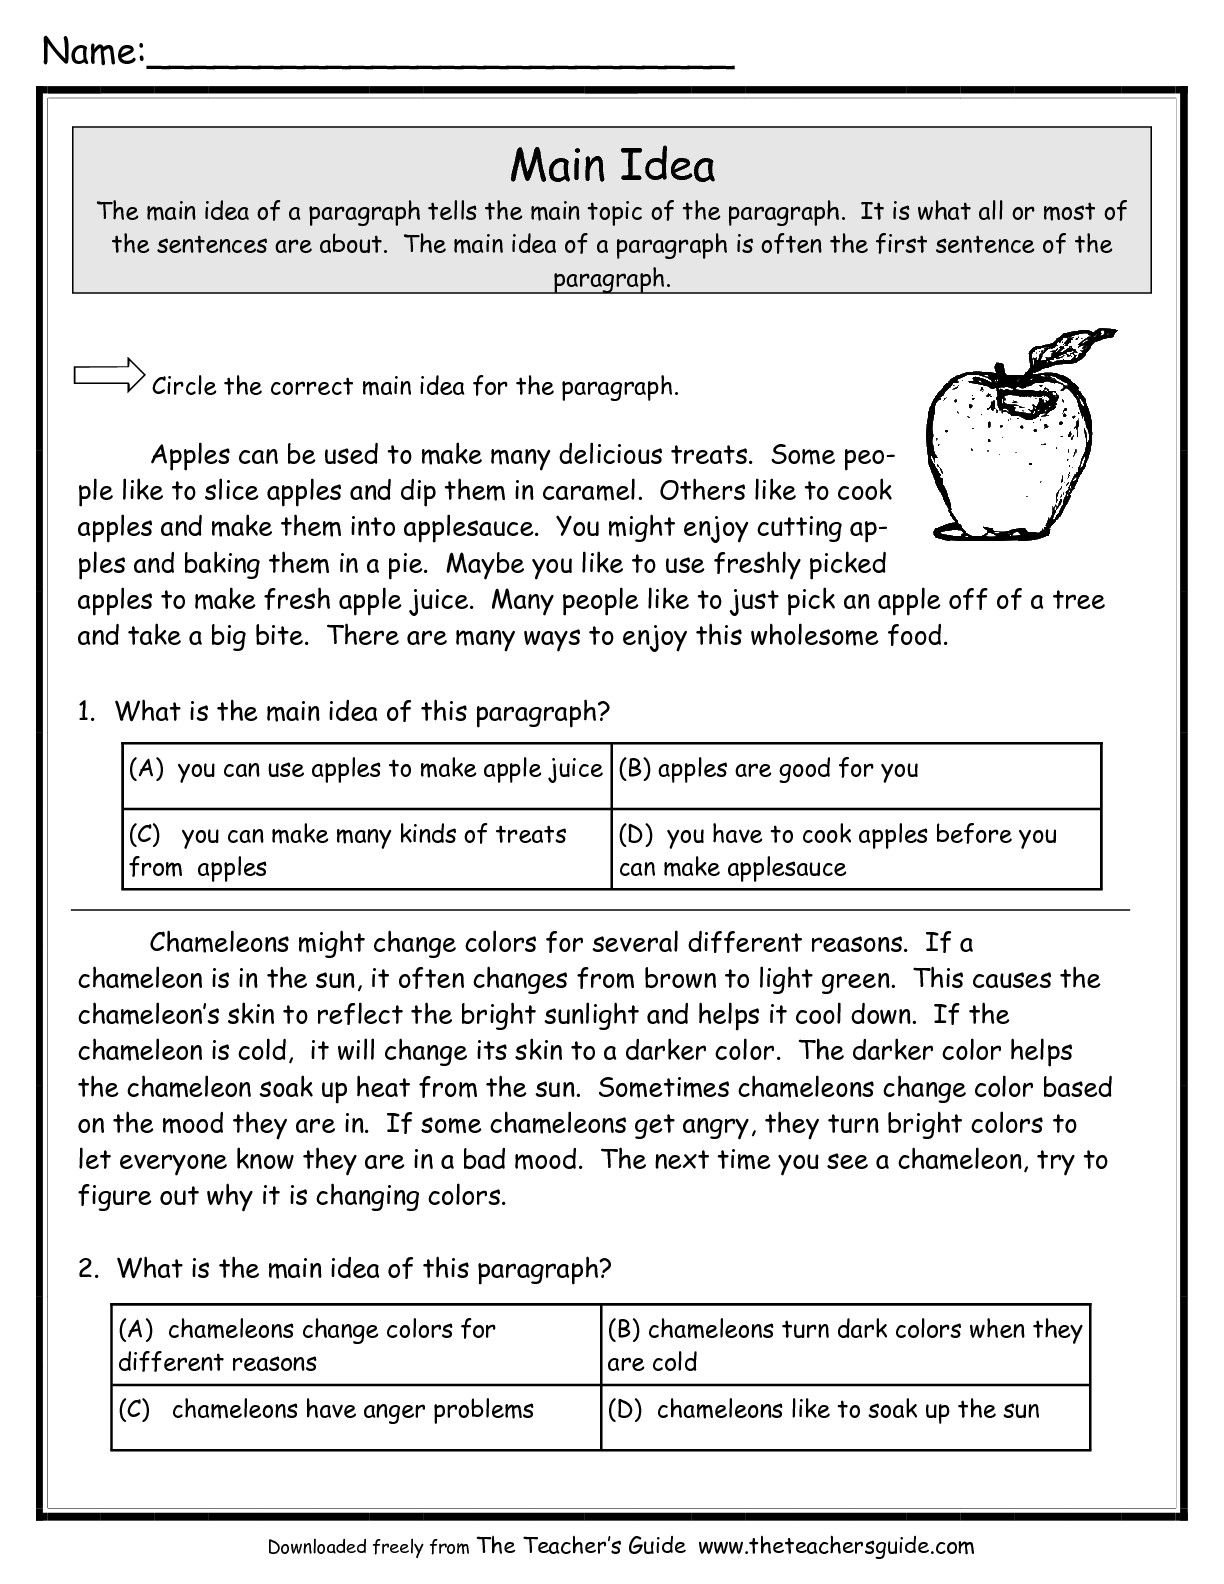 10 Spectacular Main Idea Worksheets For 5Th Grade main idea worksheets from the teachers guide resources for work 23 2023